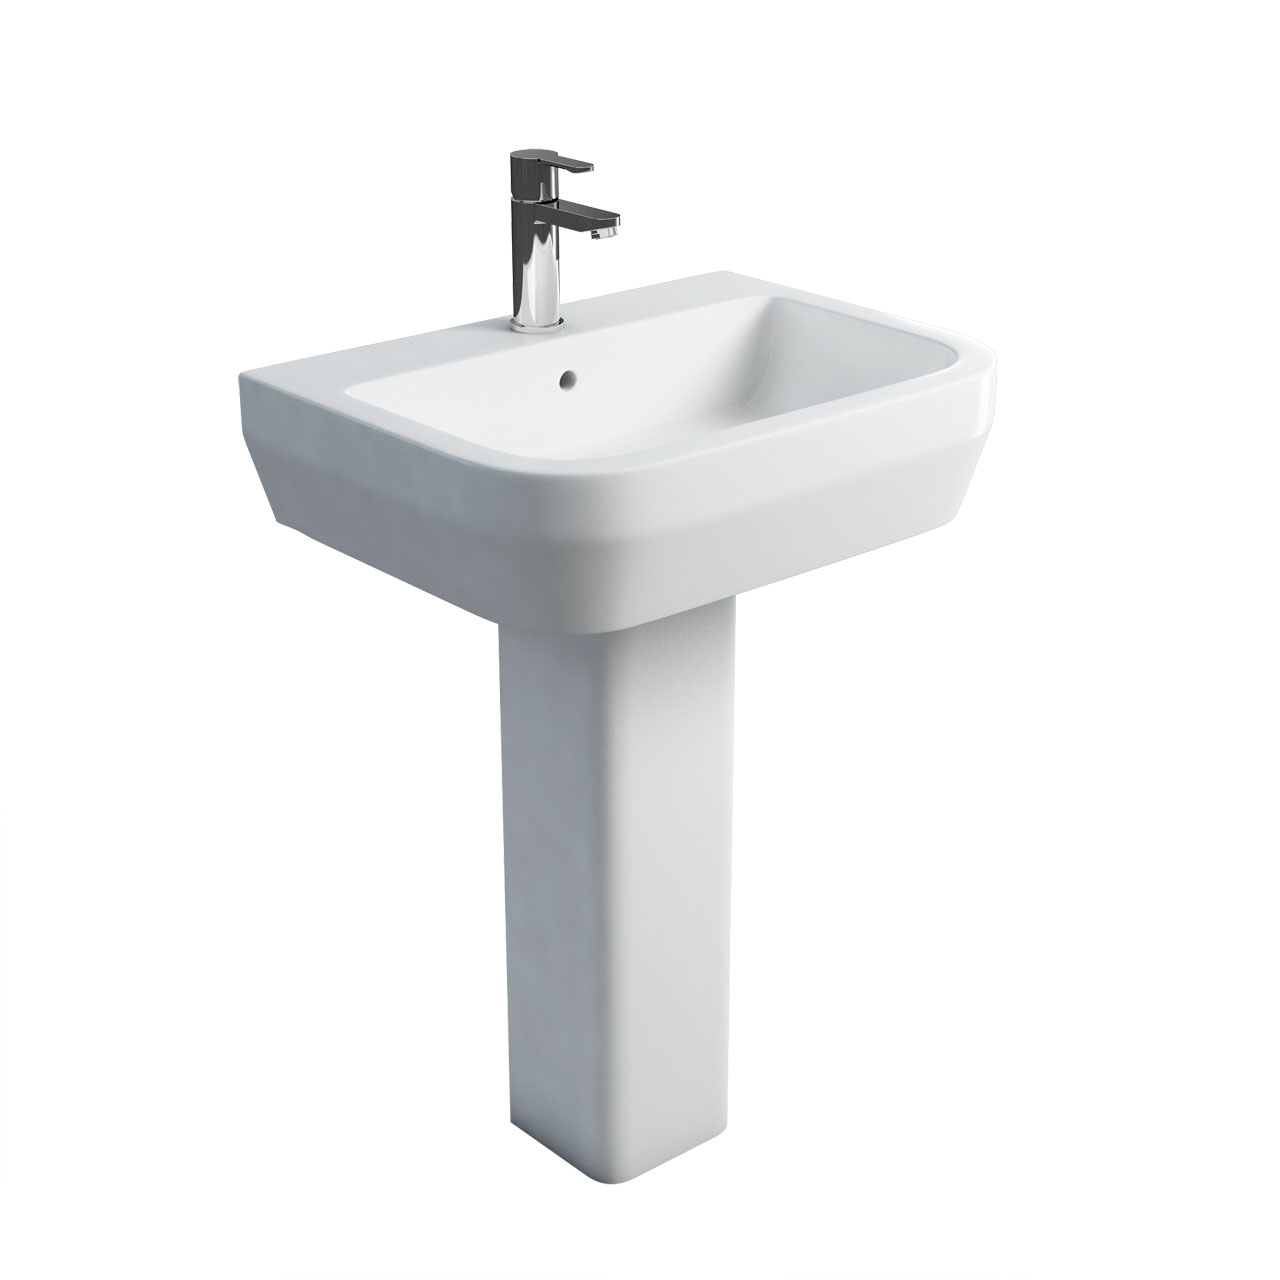 Curve S30 600 basin and square fronted pedestal